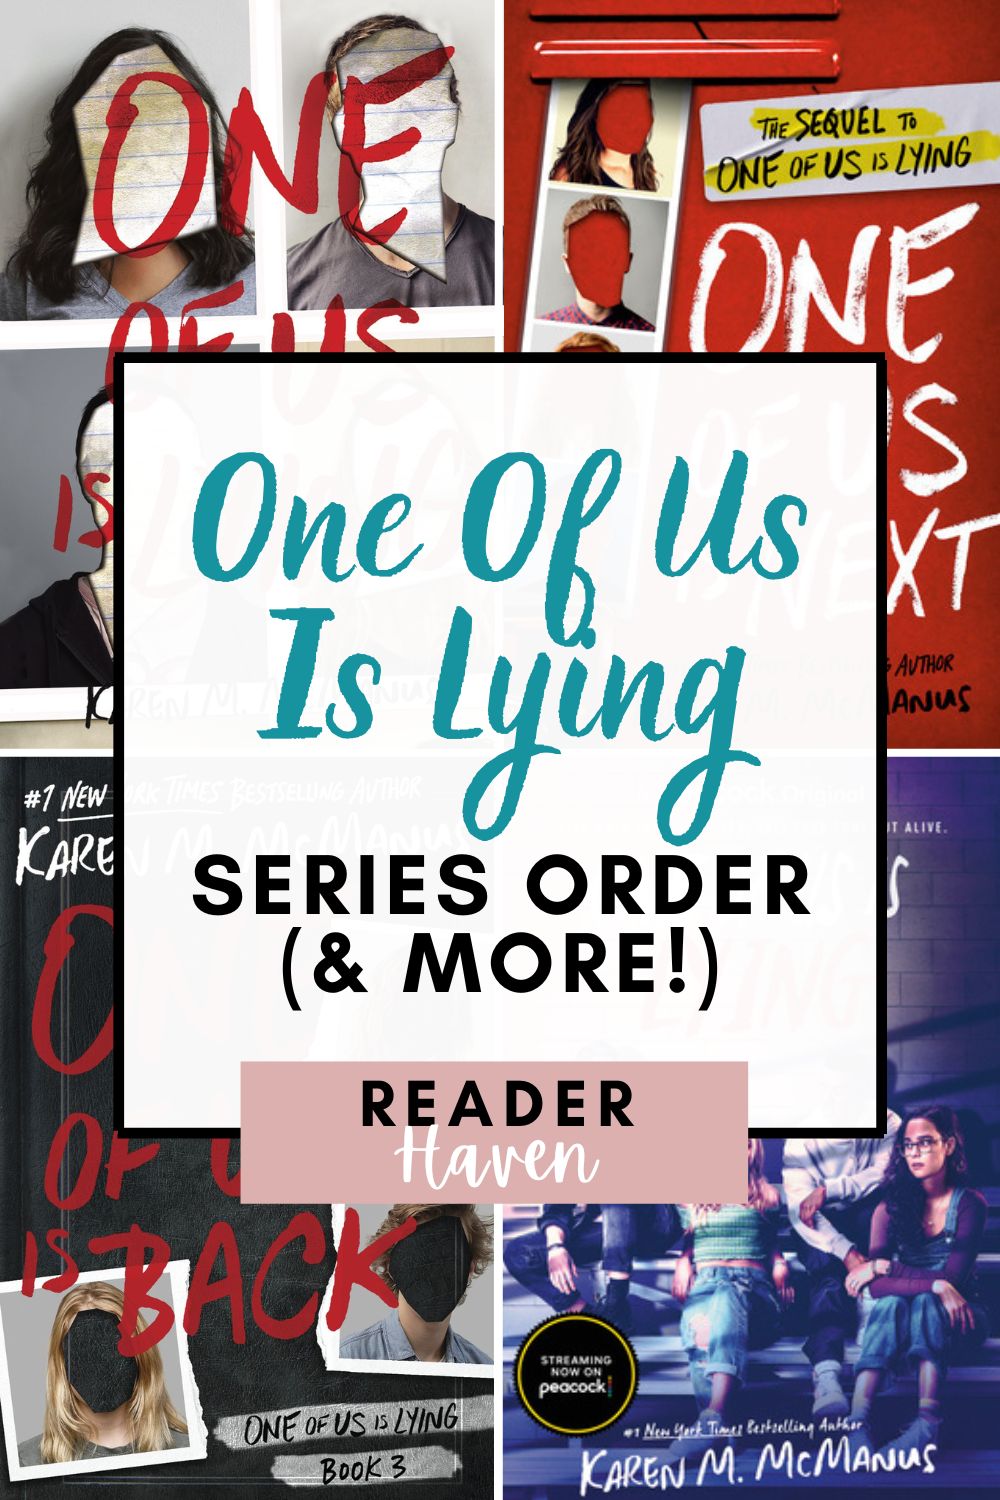 One Of Us Is Lying book series order